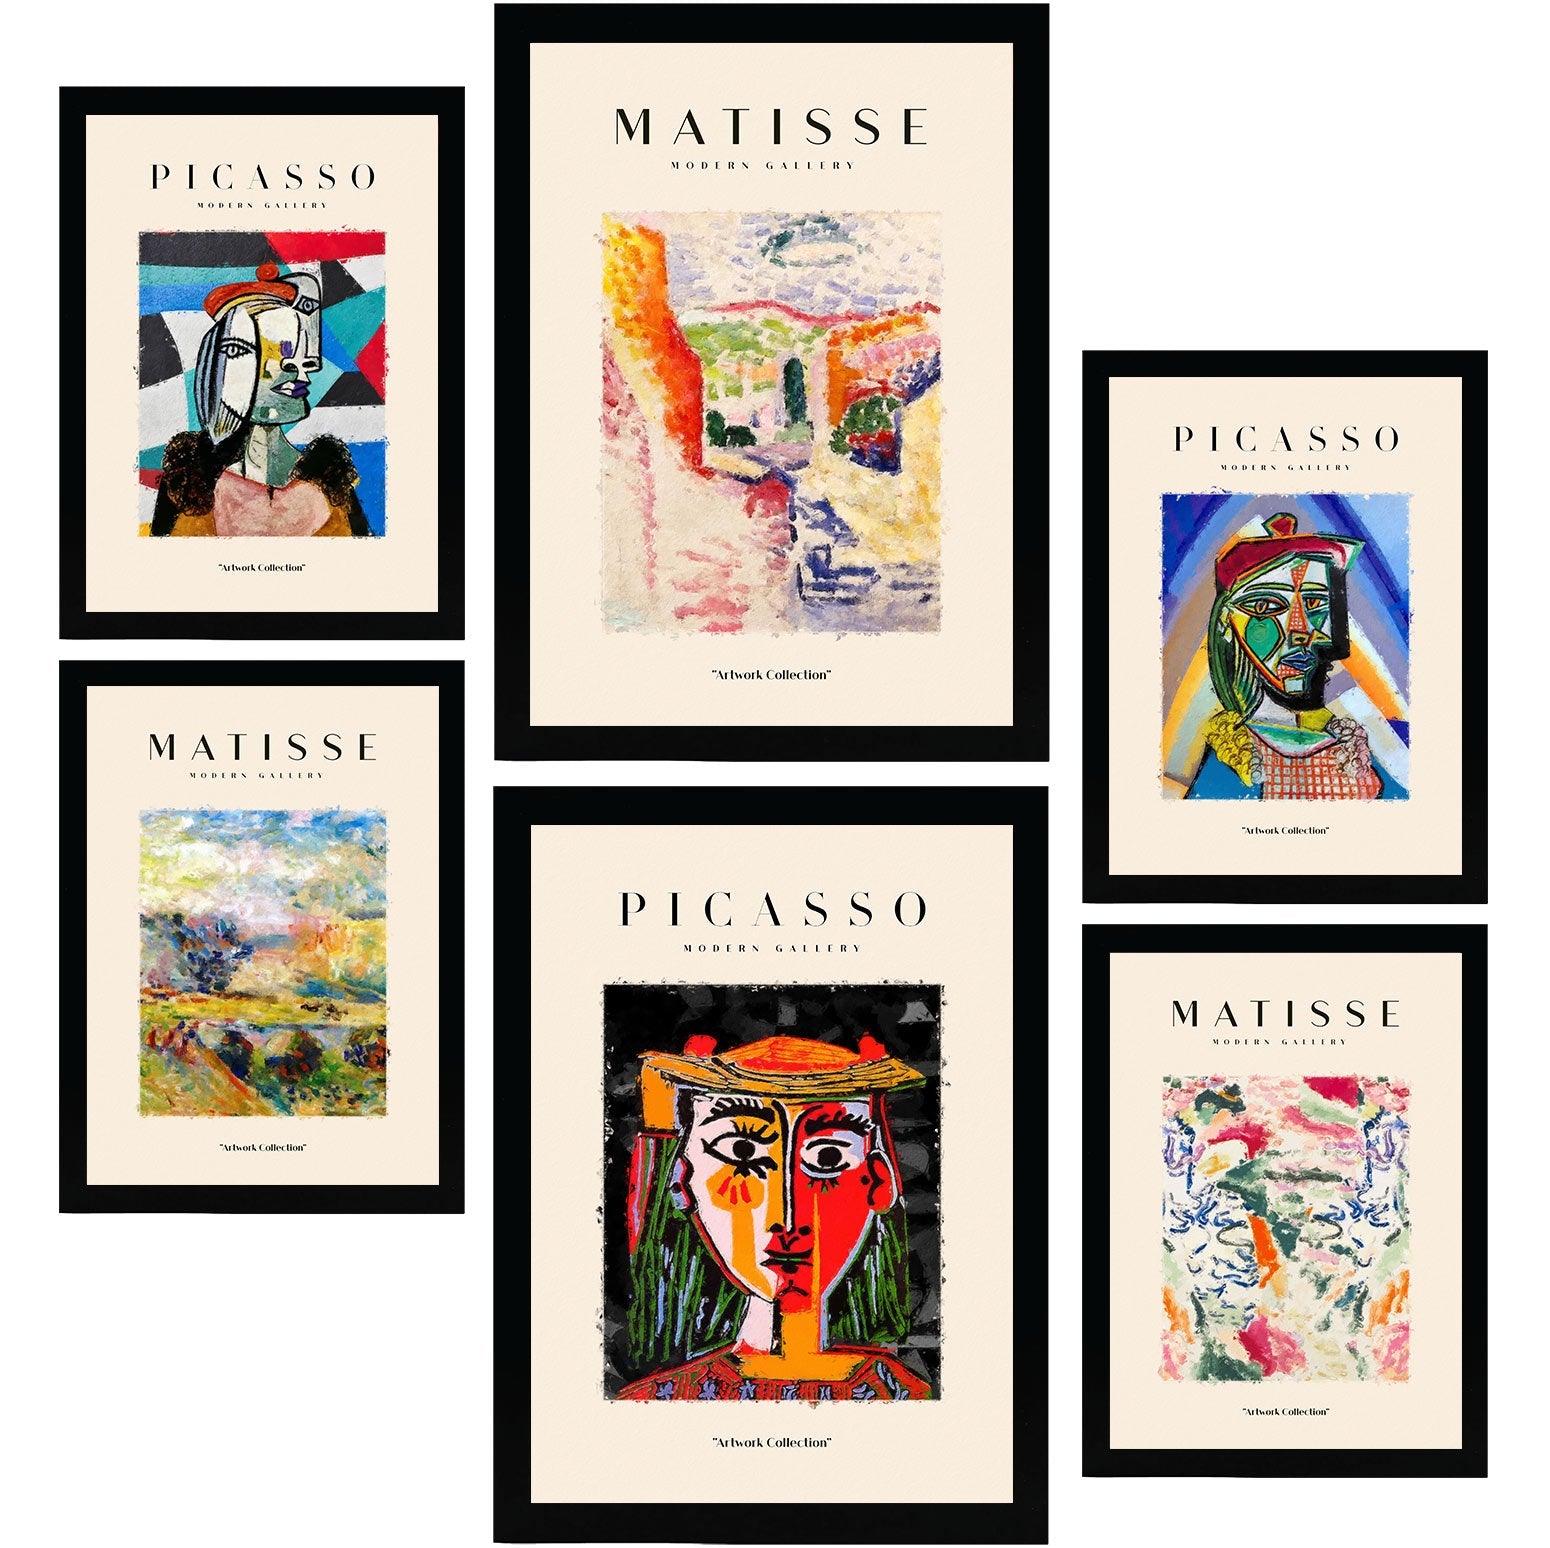 Picasso and Matisse Posters. Last Century. Fauvism and Surrealism Art Gallery-Artwork-Nacnic-Nacnic Estudio SL